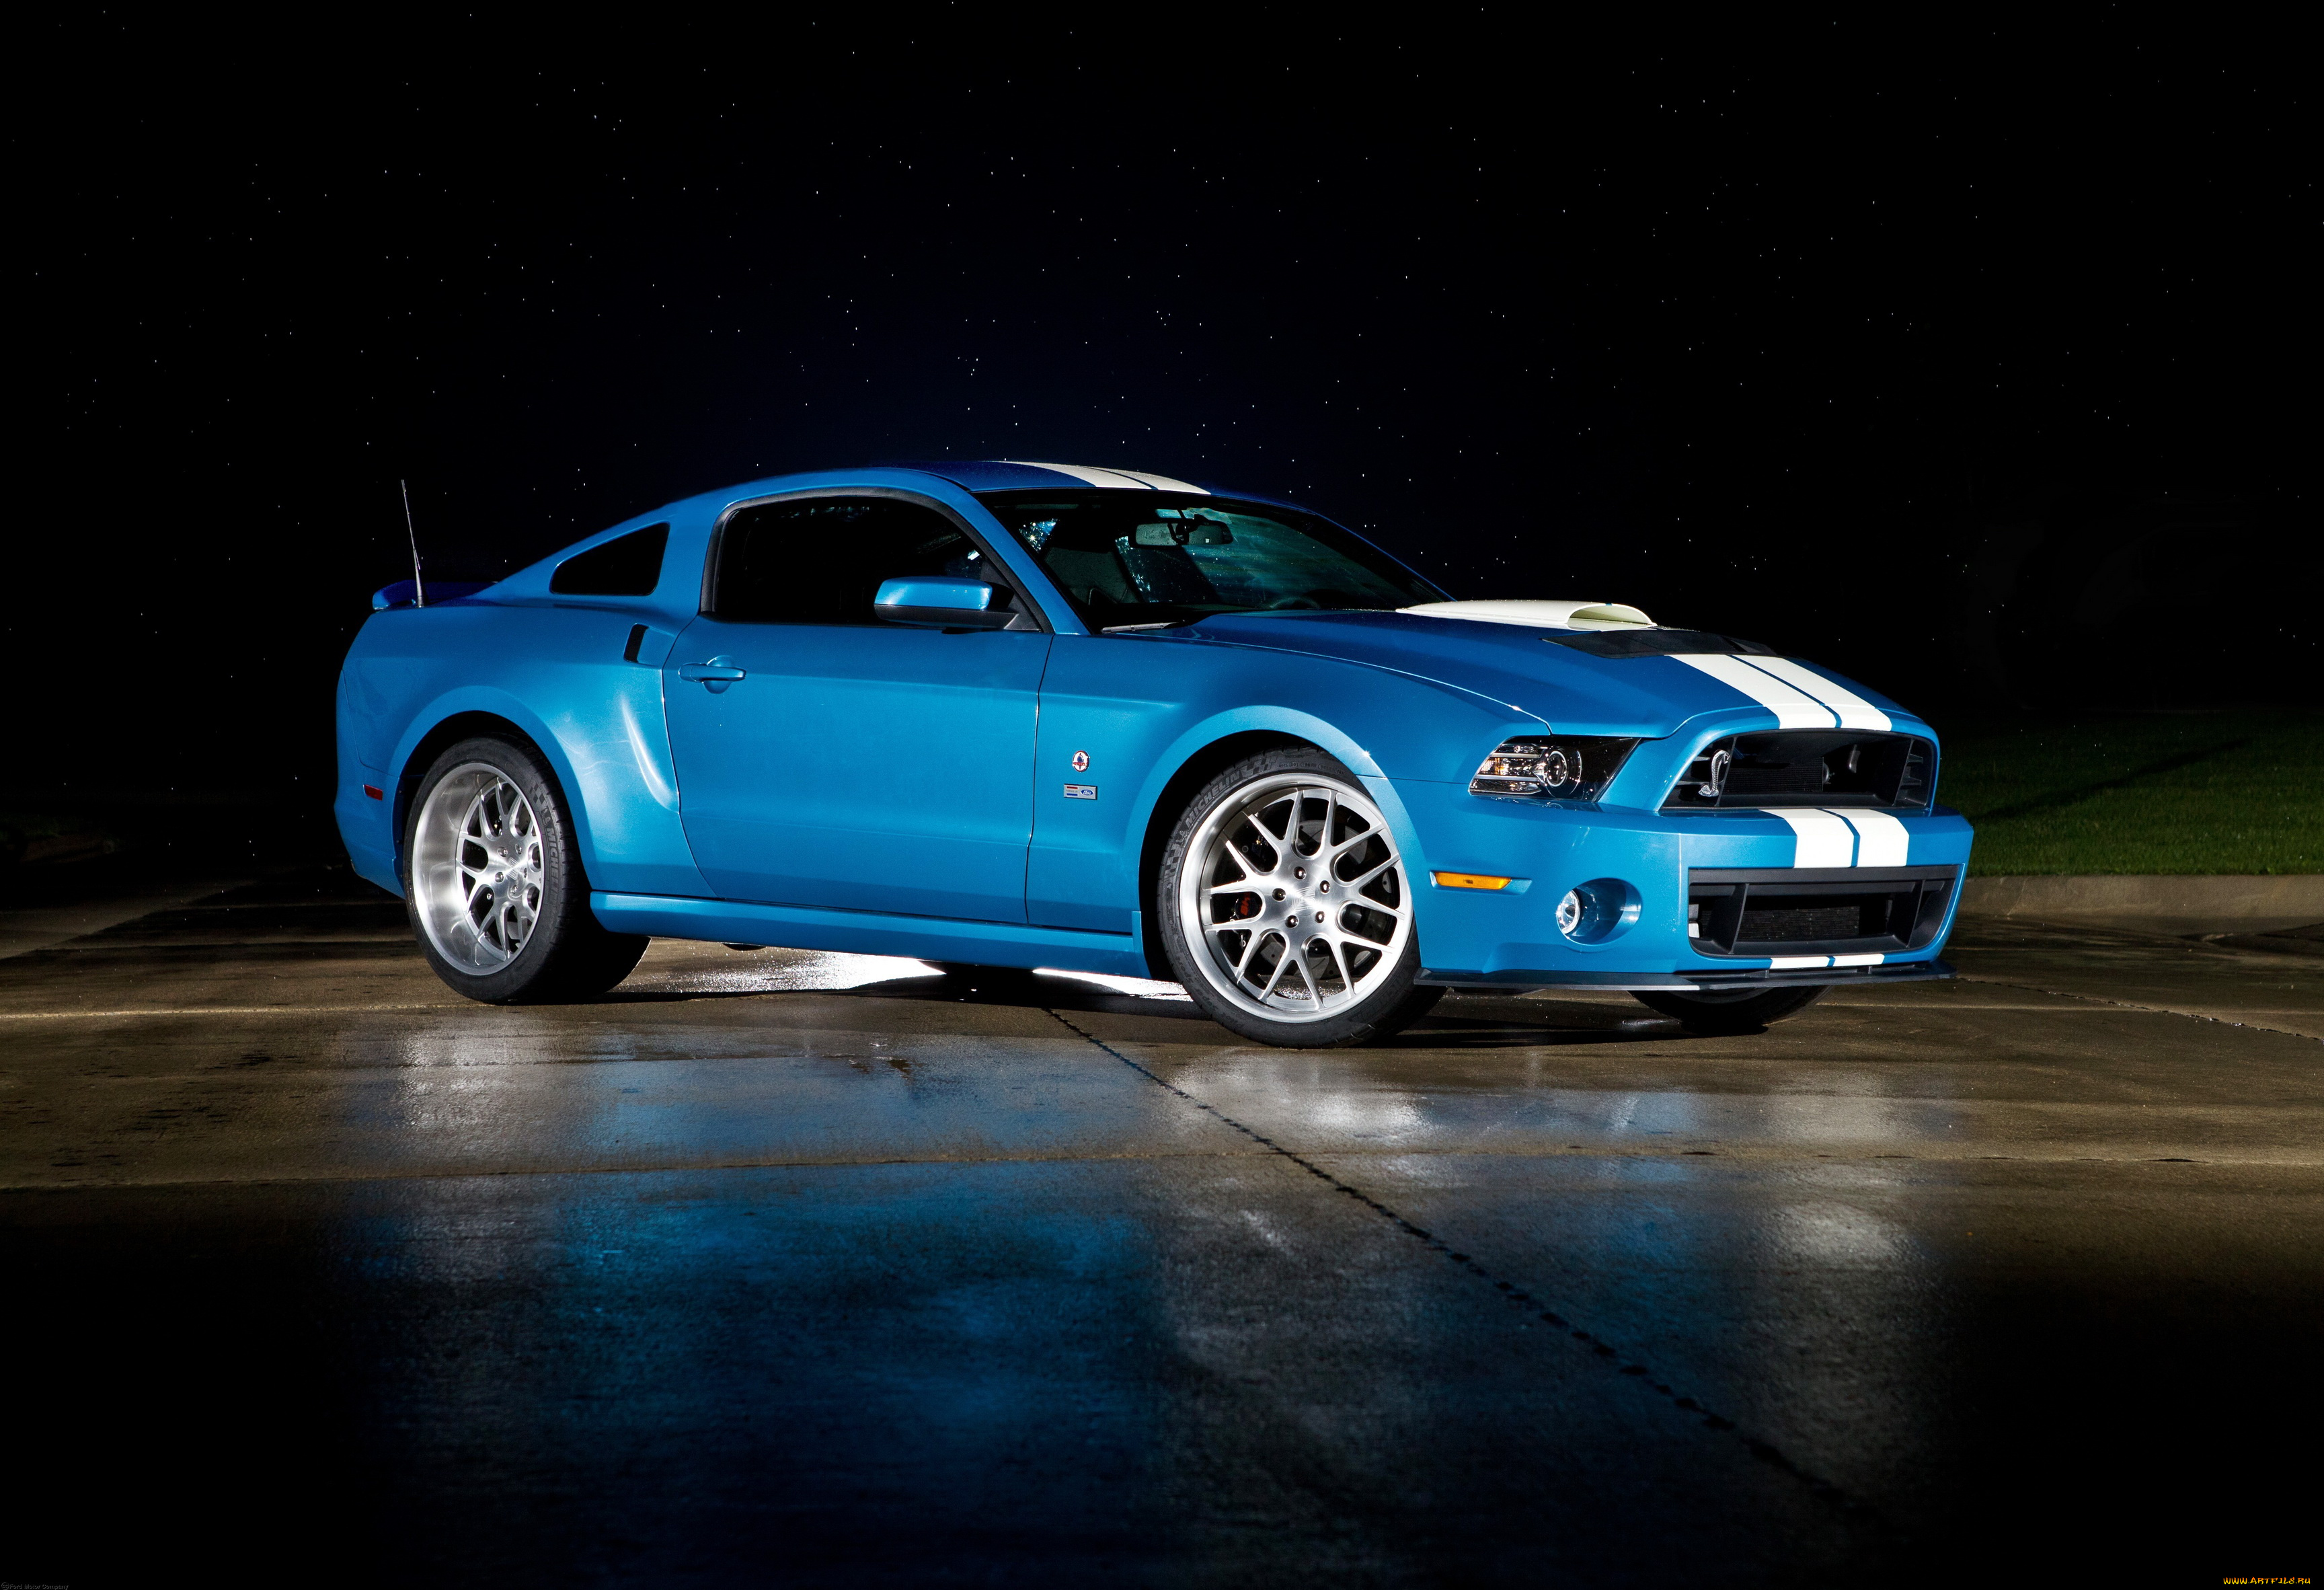 2013, shelby, gt500, cobra, based, on, ford, mustang, автомобили